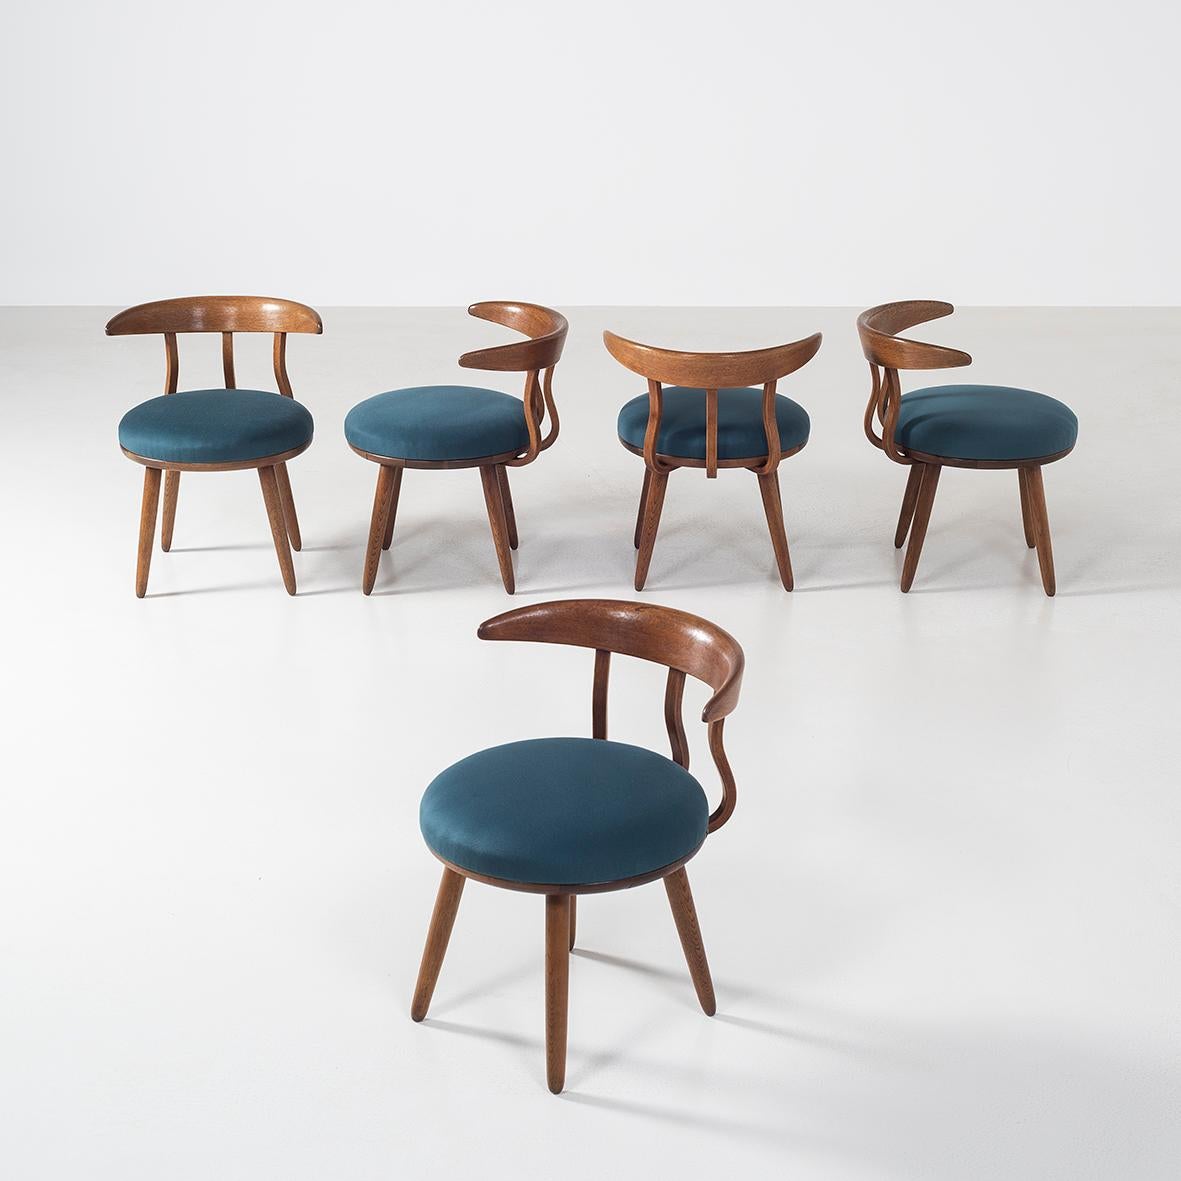 Set of 5 Chairs by Isamu Kenmochi, circa 1950 For Sale 4